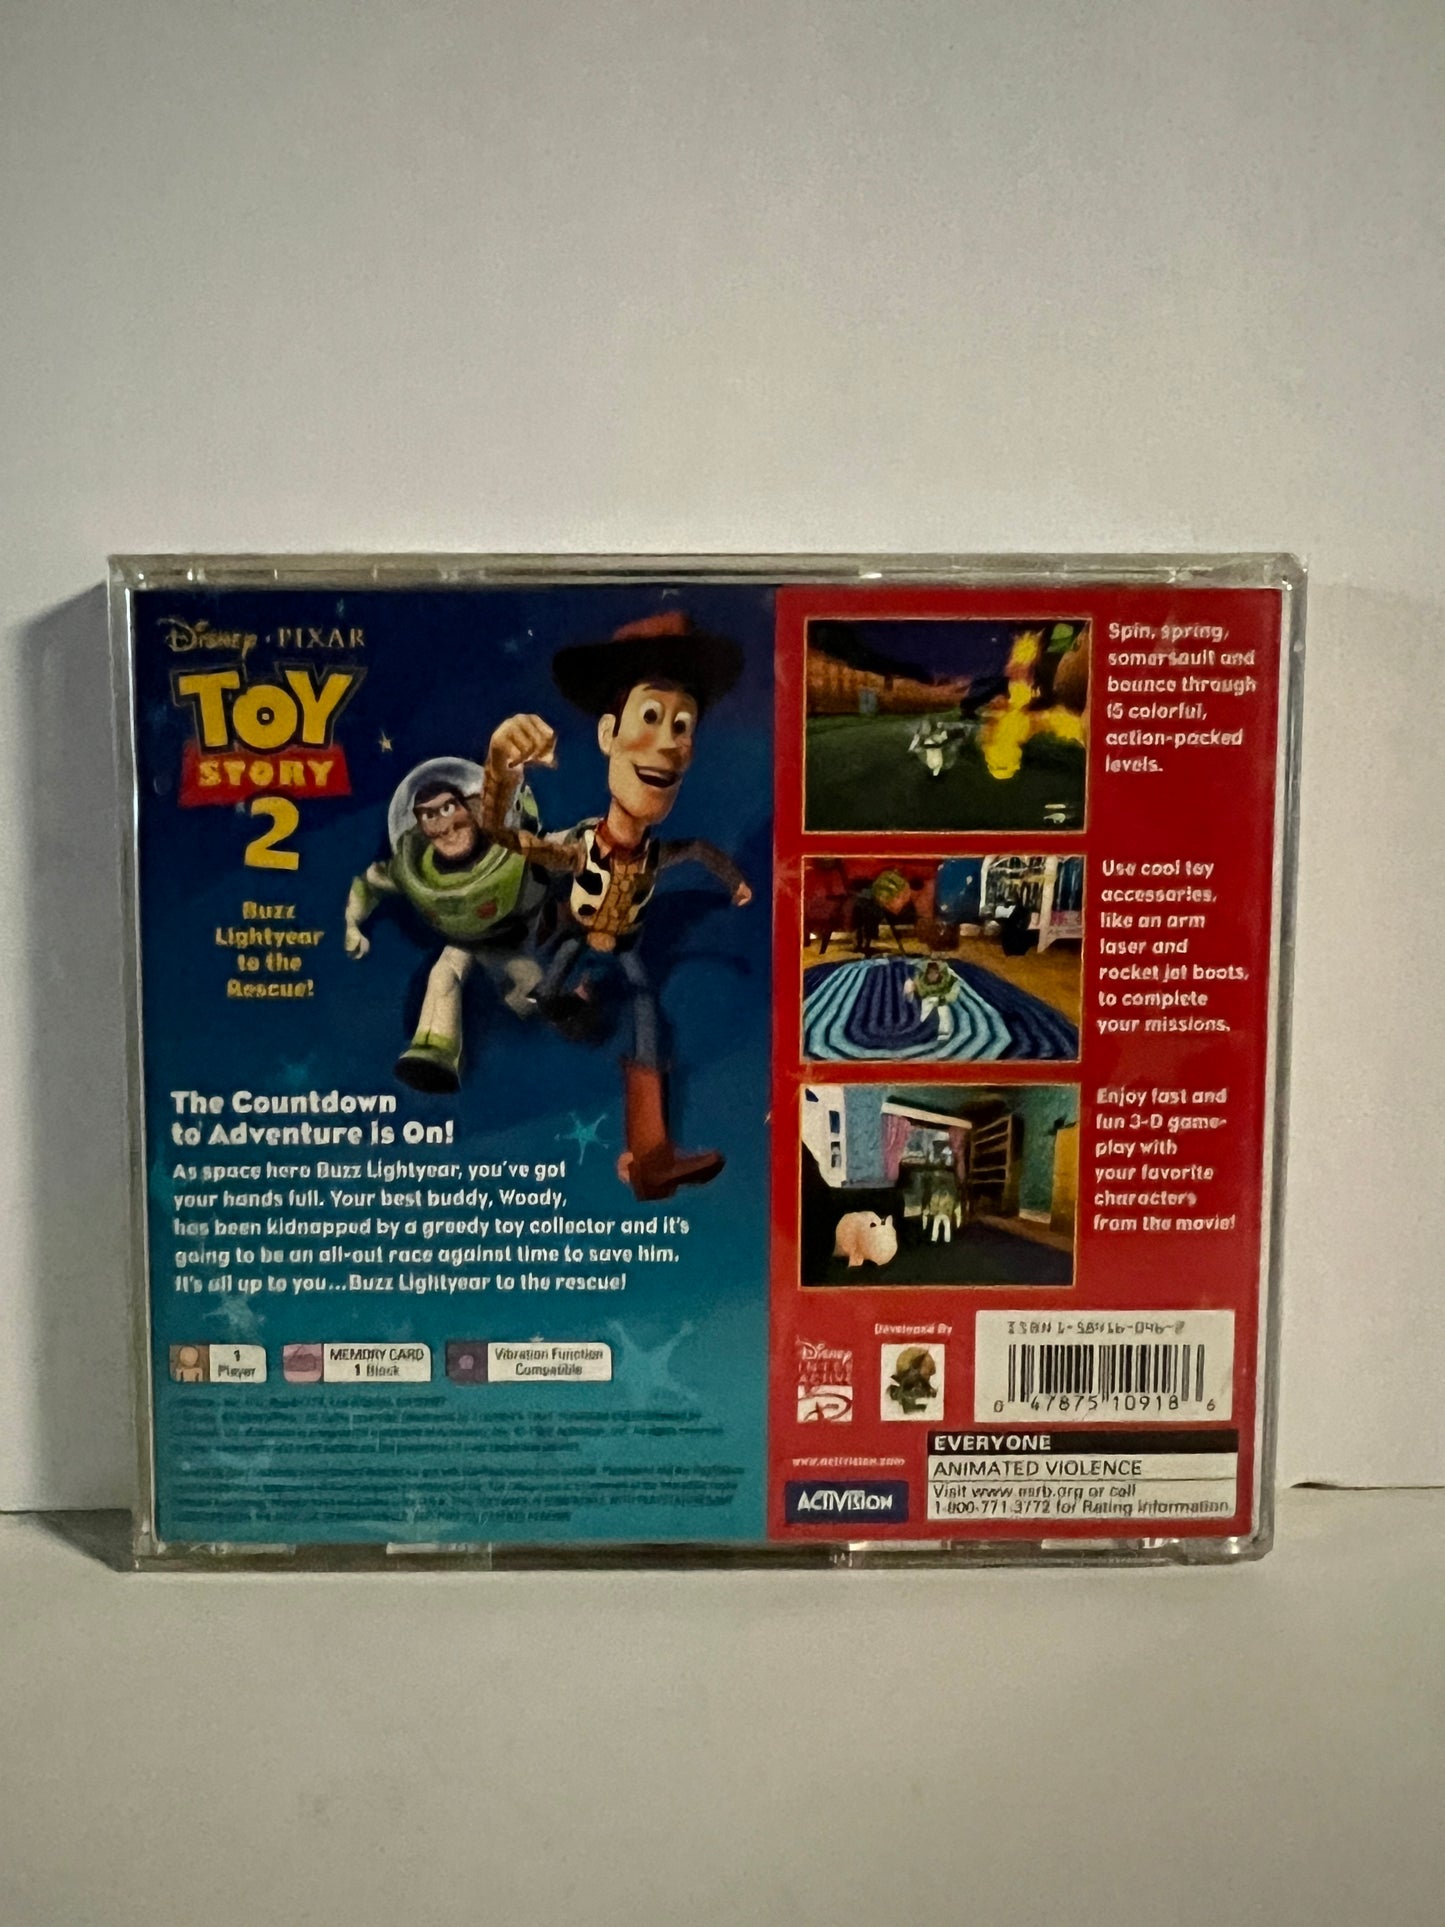 Toy Story 2 - PS1 Game - Used